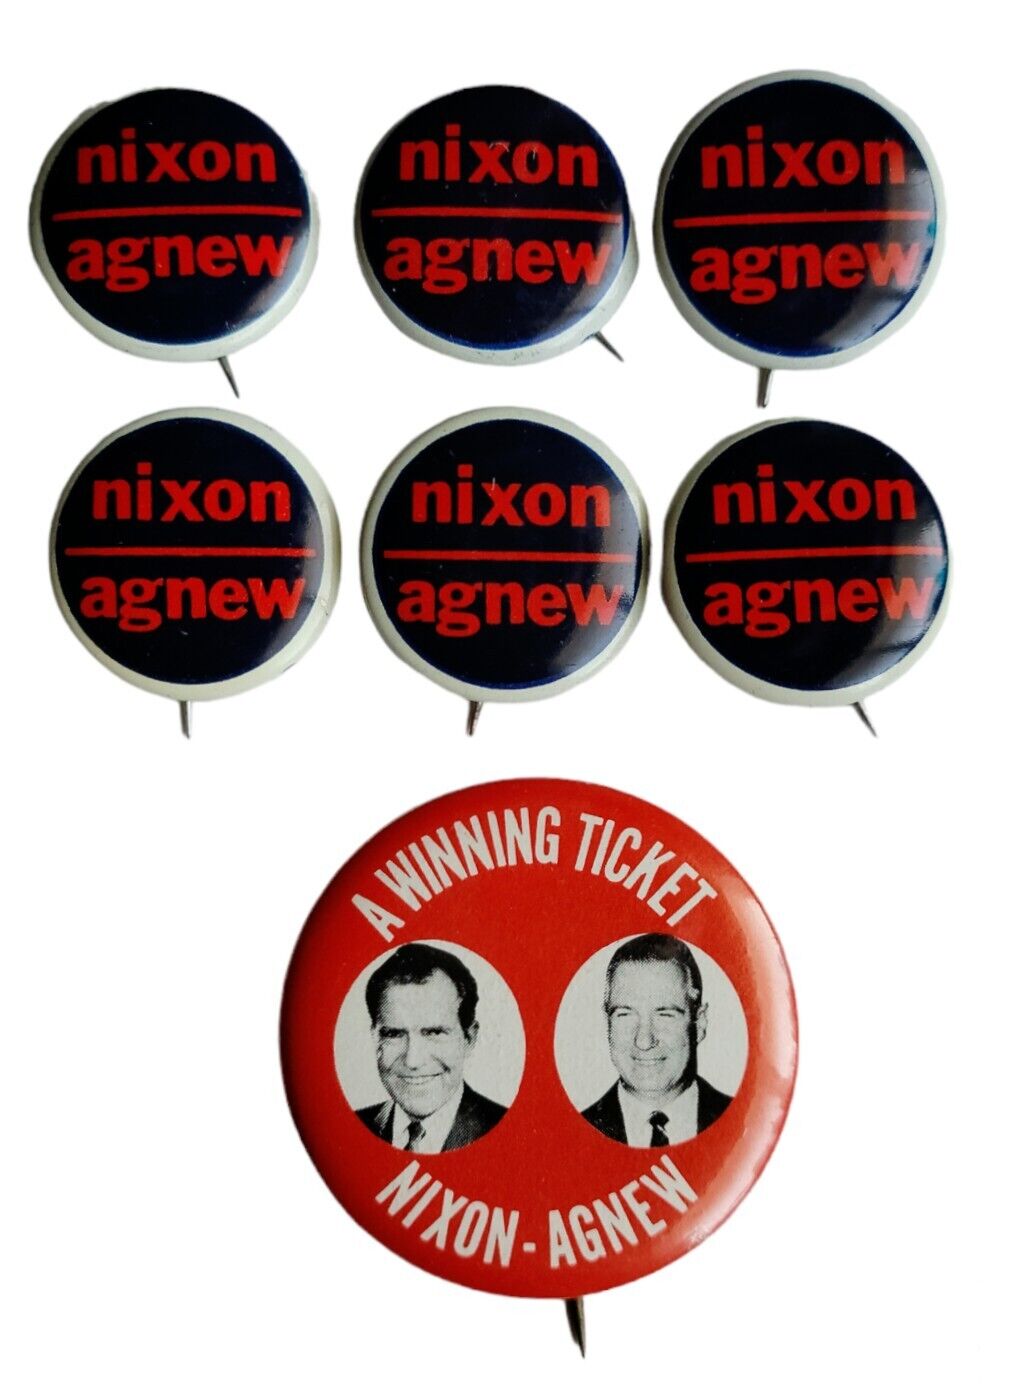 1968 A Winning Ticket Nixon - Agnew Presidential Campaign Pinback Button Lot